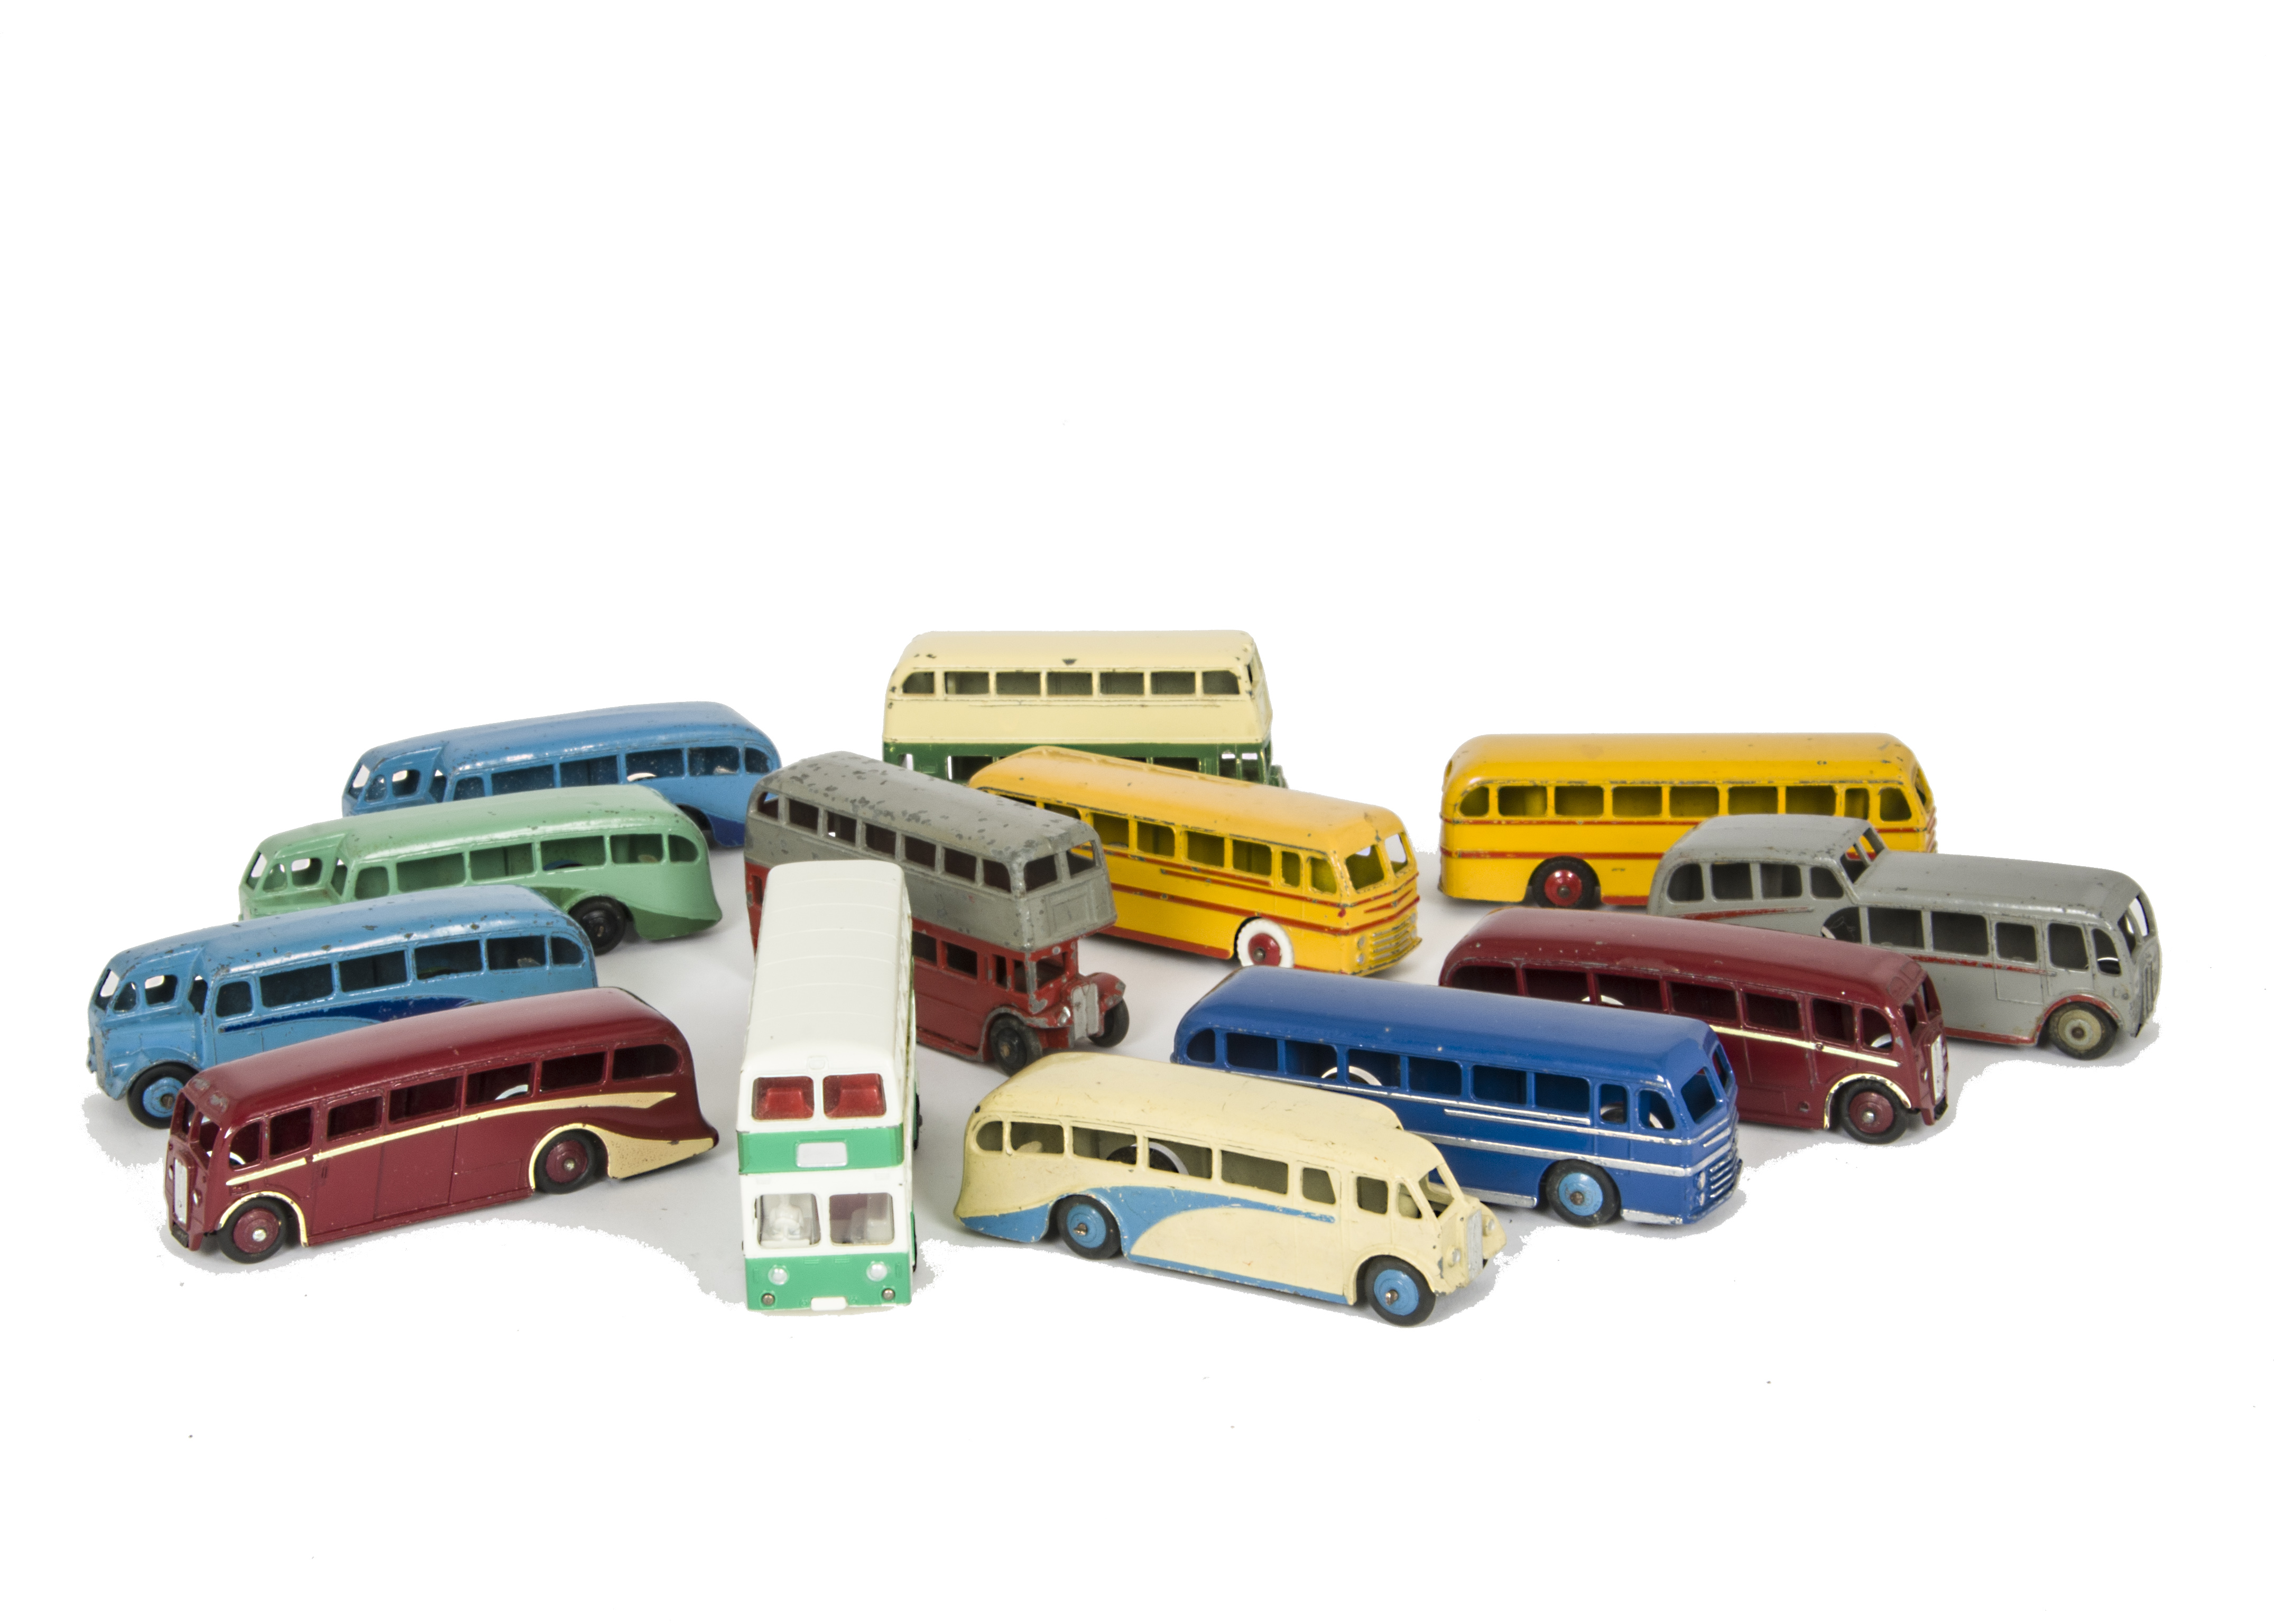 Loose Dinky Toy Buses & Coaches, including 29f Observation Coach, 29e Single Deck Bus (4), 29h Duple